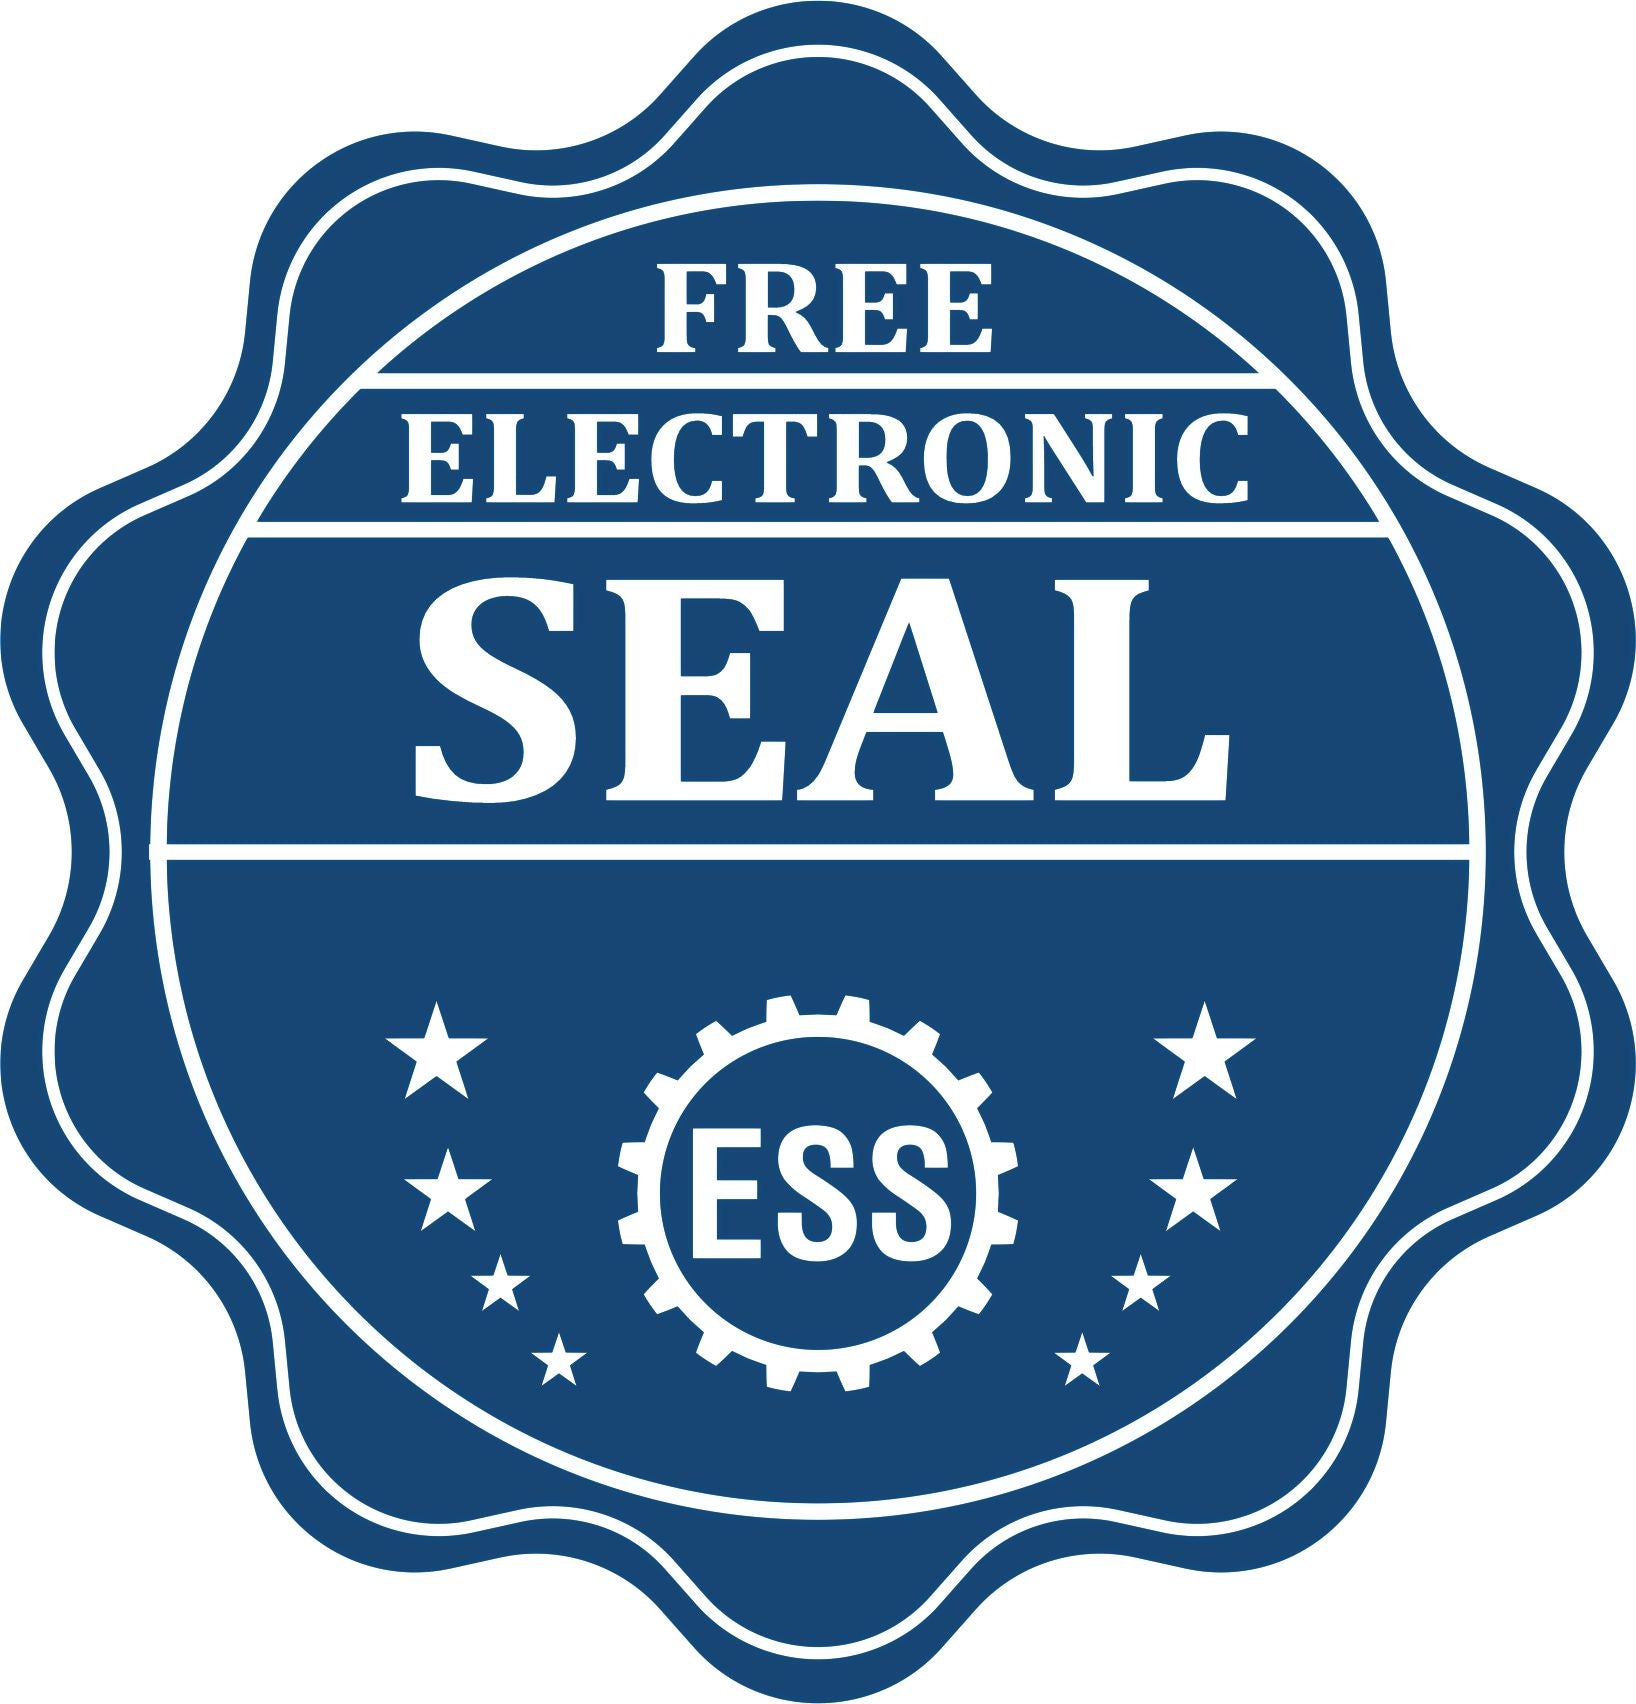 A badge showing a free electronic seal for the Premium MaxLight Pre-Inked Alaska Landscape Architectural Stamp with stars and the ESS gear on the emblem.